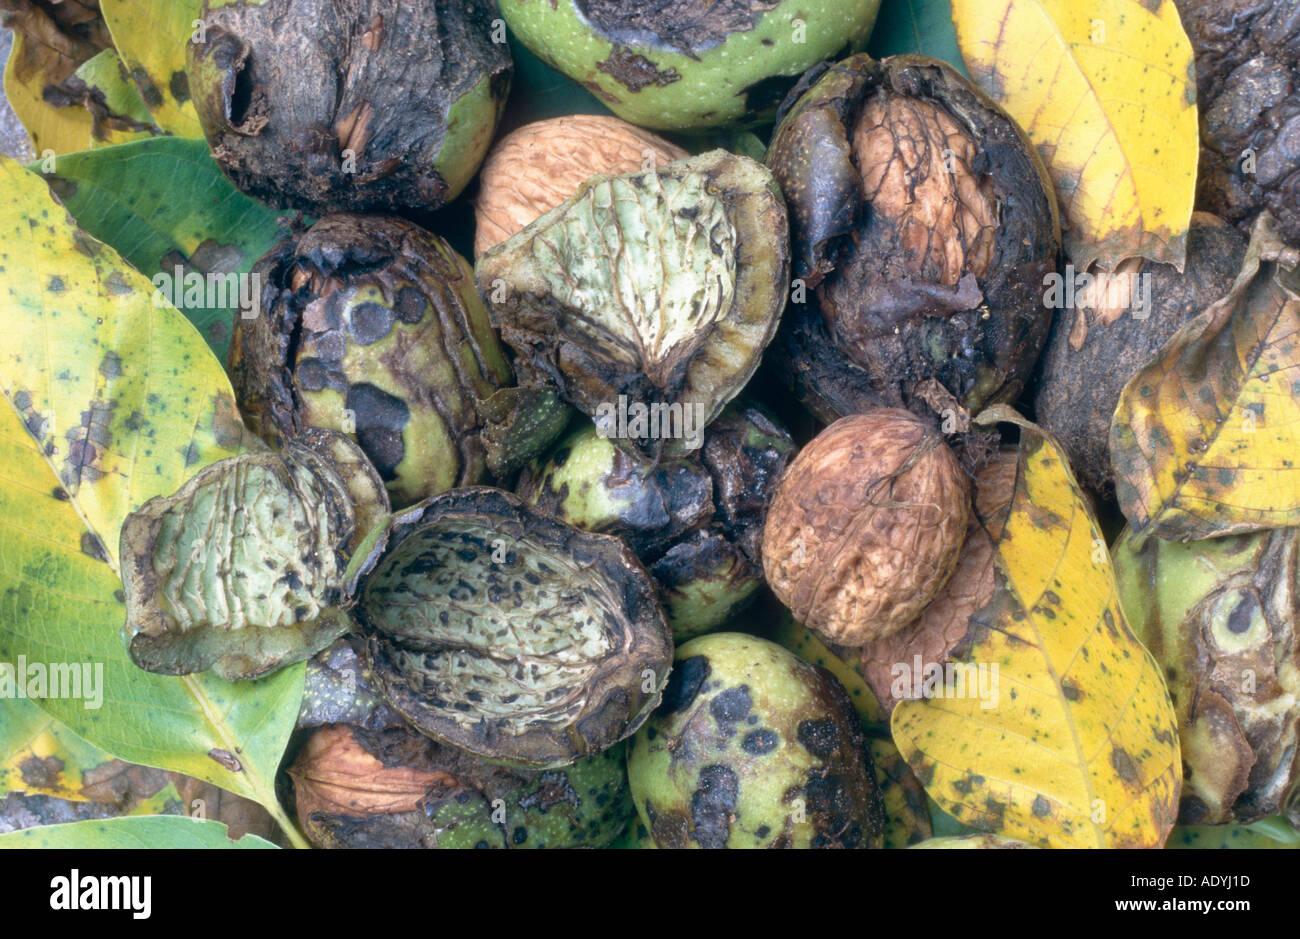 walnut (Juglans regia), nuts with green outer layer. Stock Photo